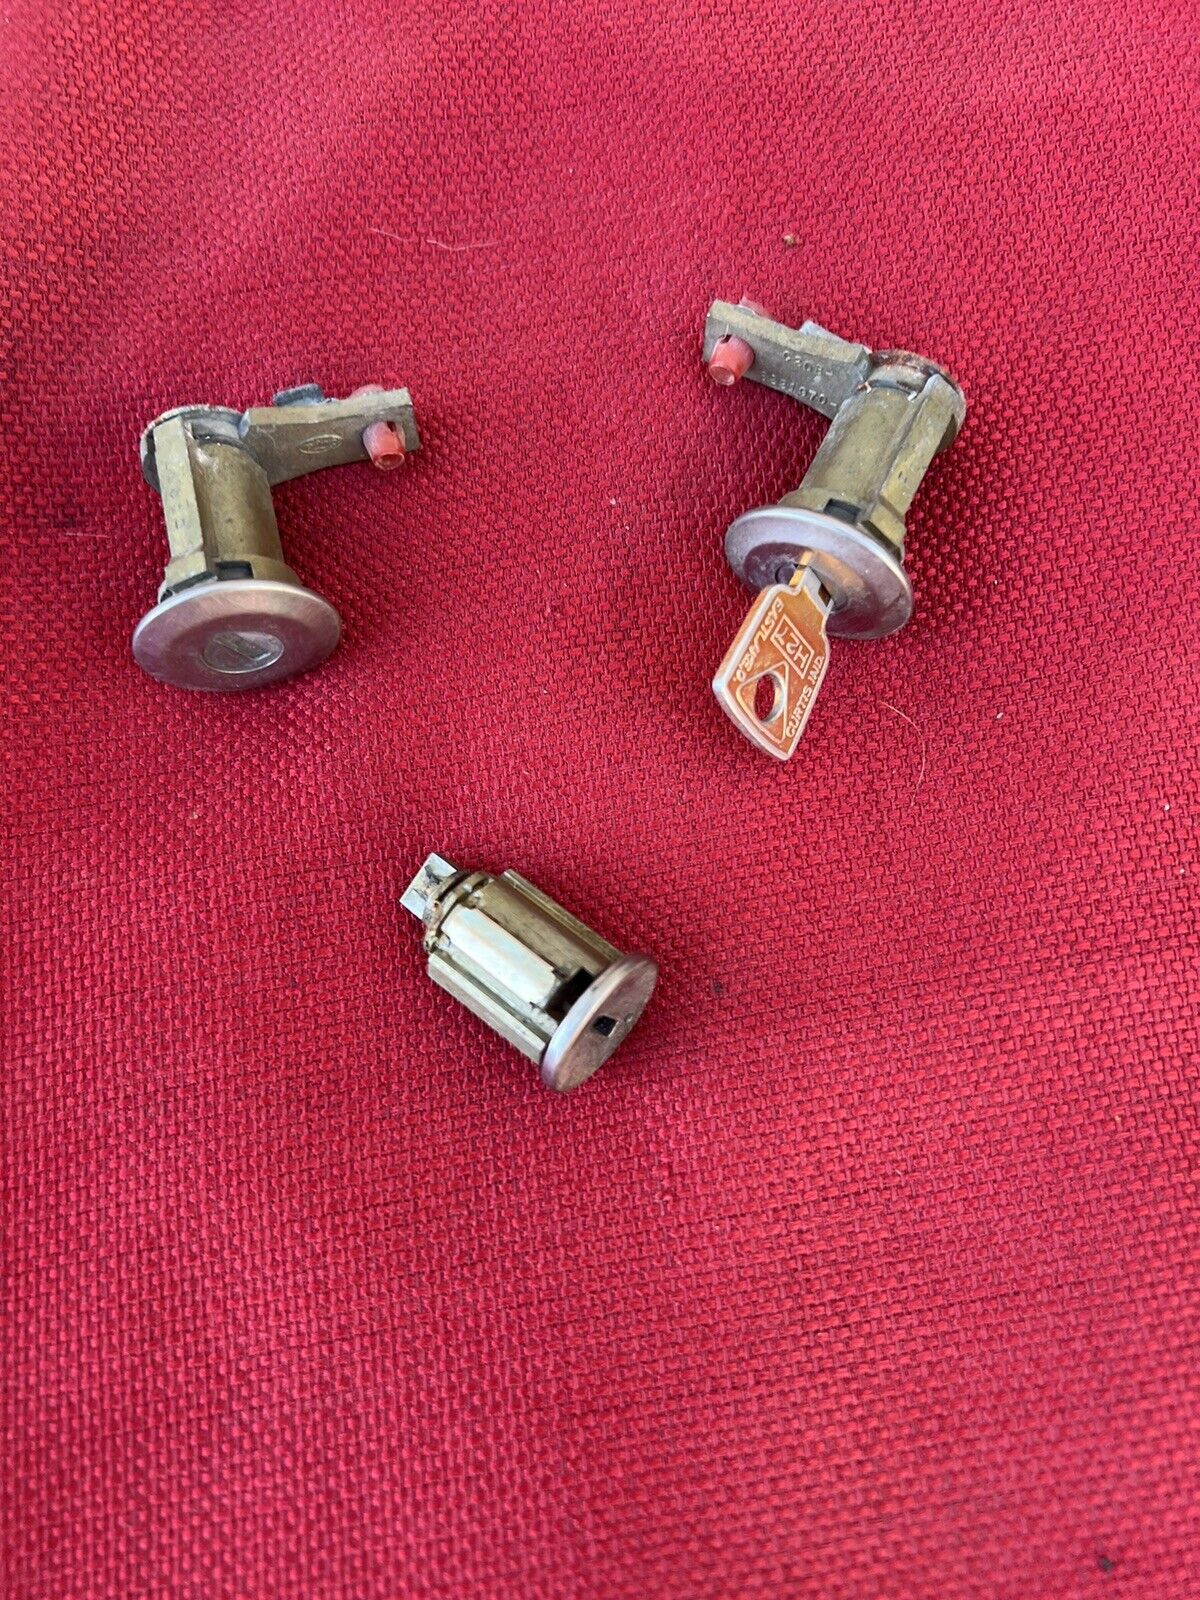 1964-1965 Lincoln Continental Ignition & Door Lock Cylinder And Key